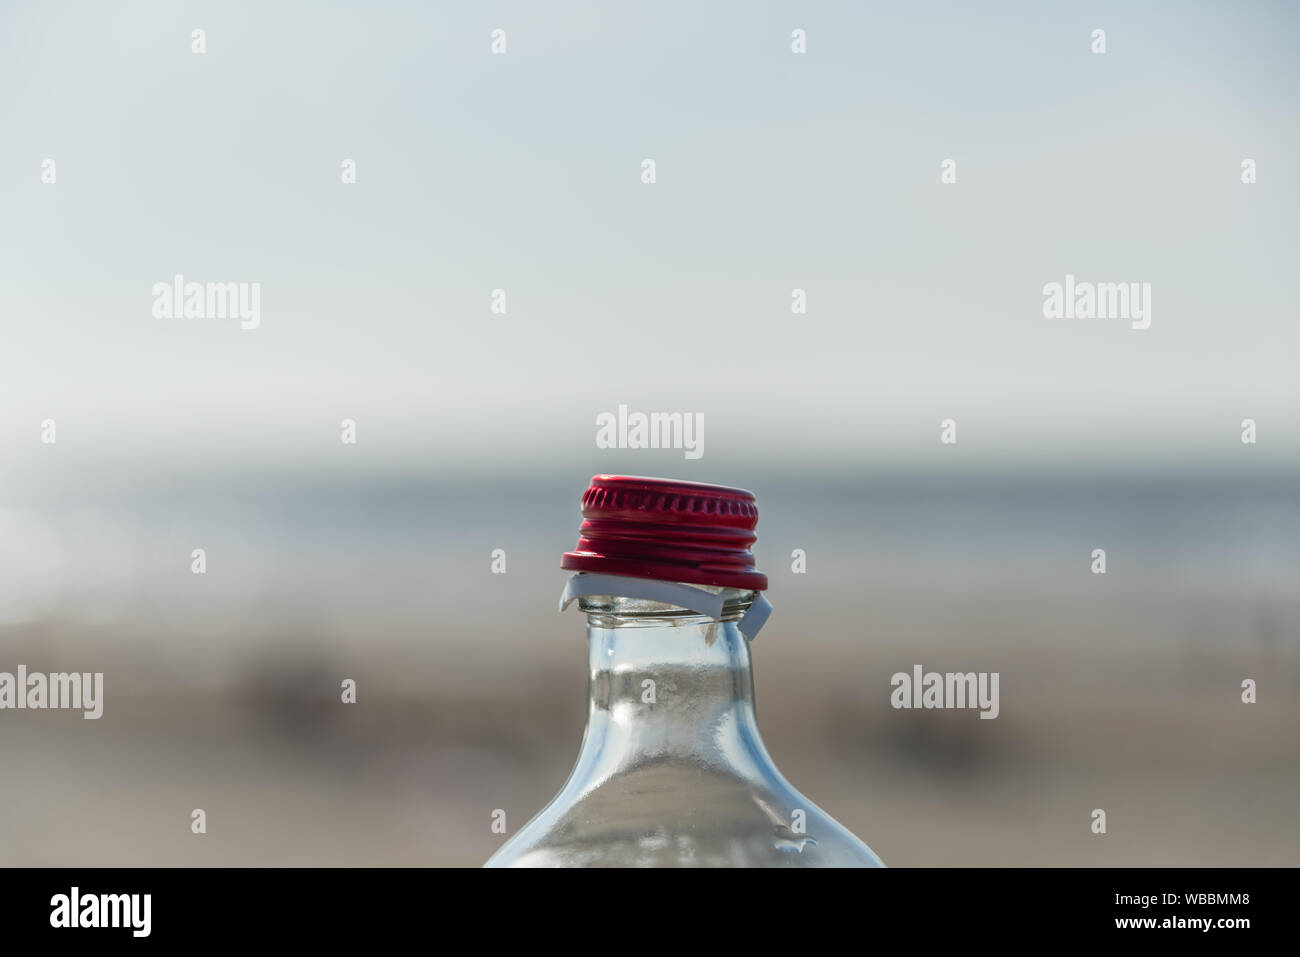 Opened bottle red closure against blury background Stock Photo